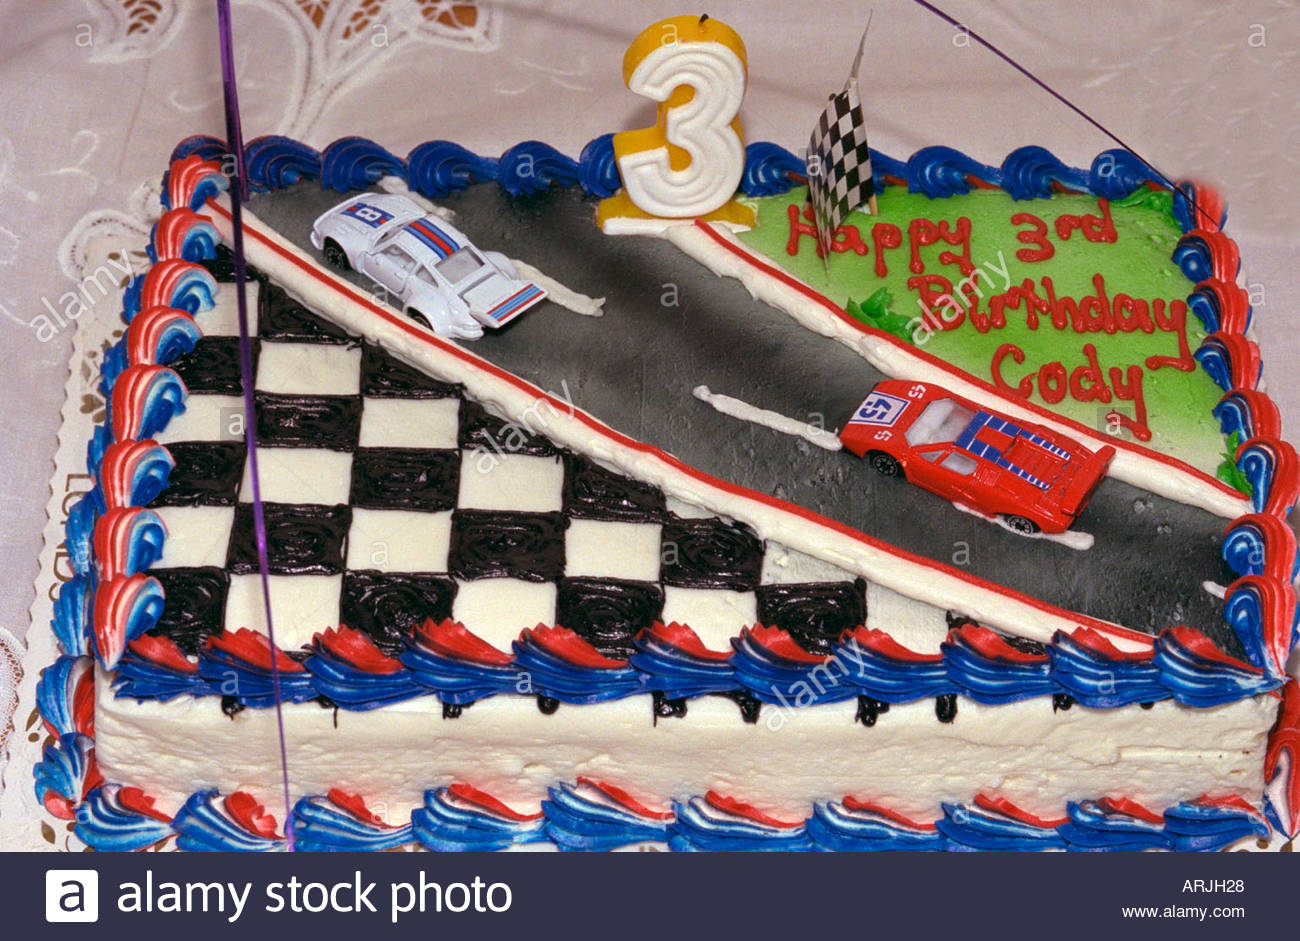 3 Year Old Birthday Cakes for Boys Cars